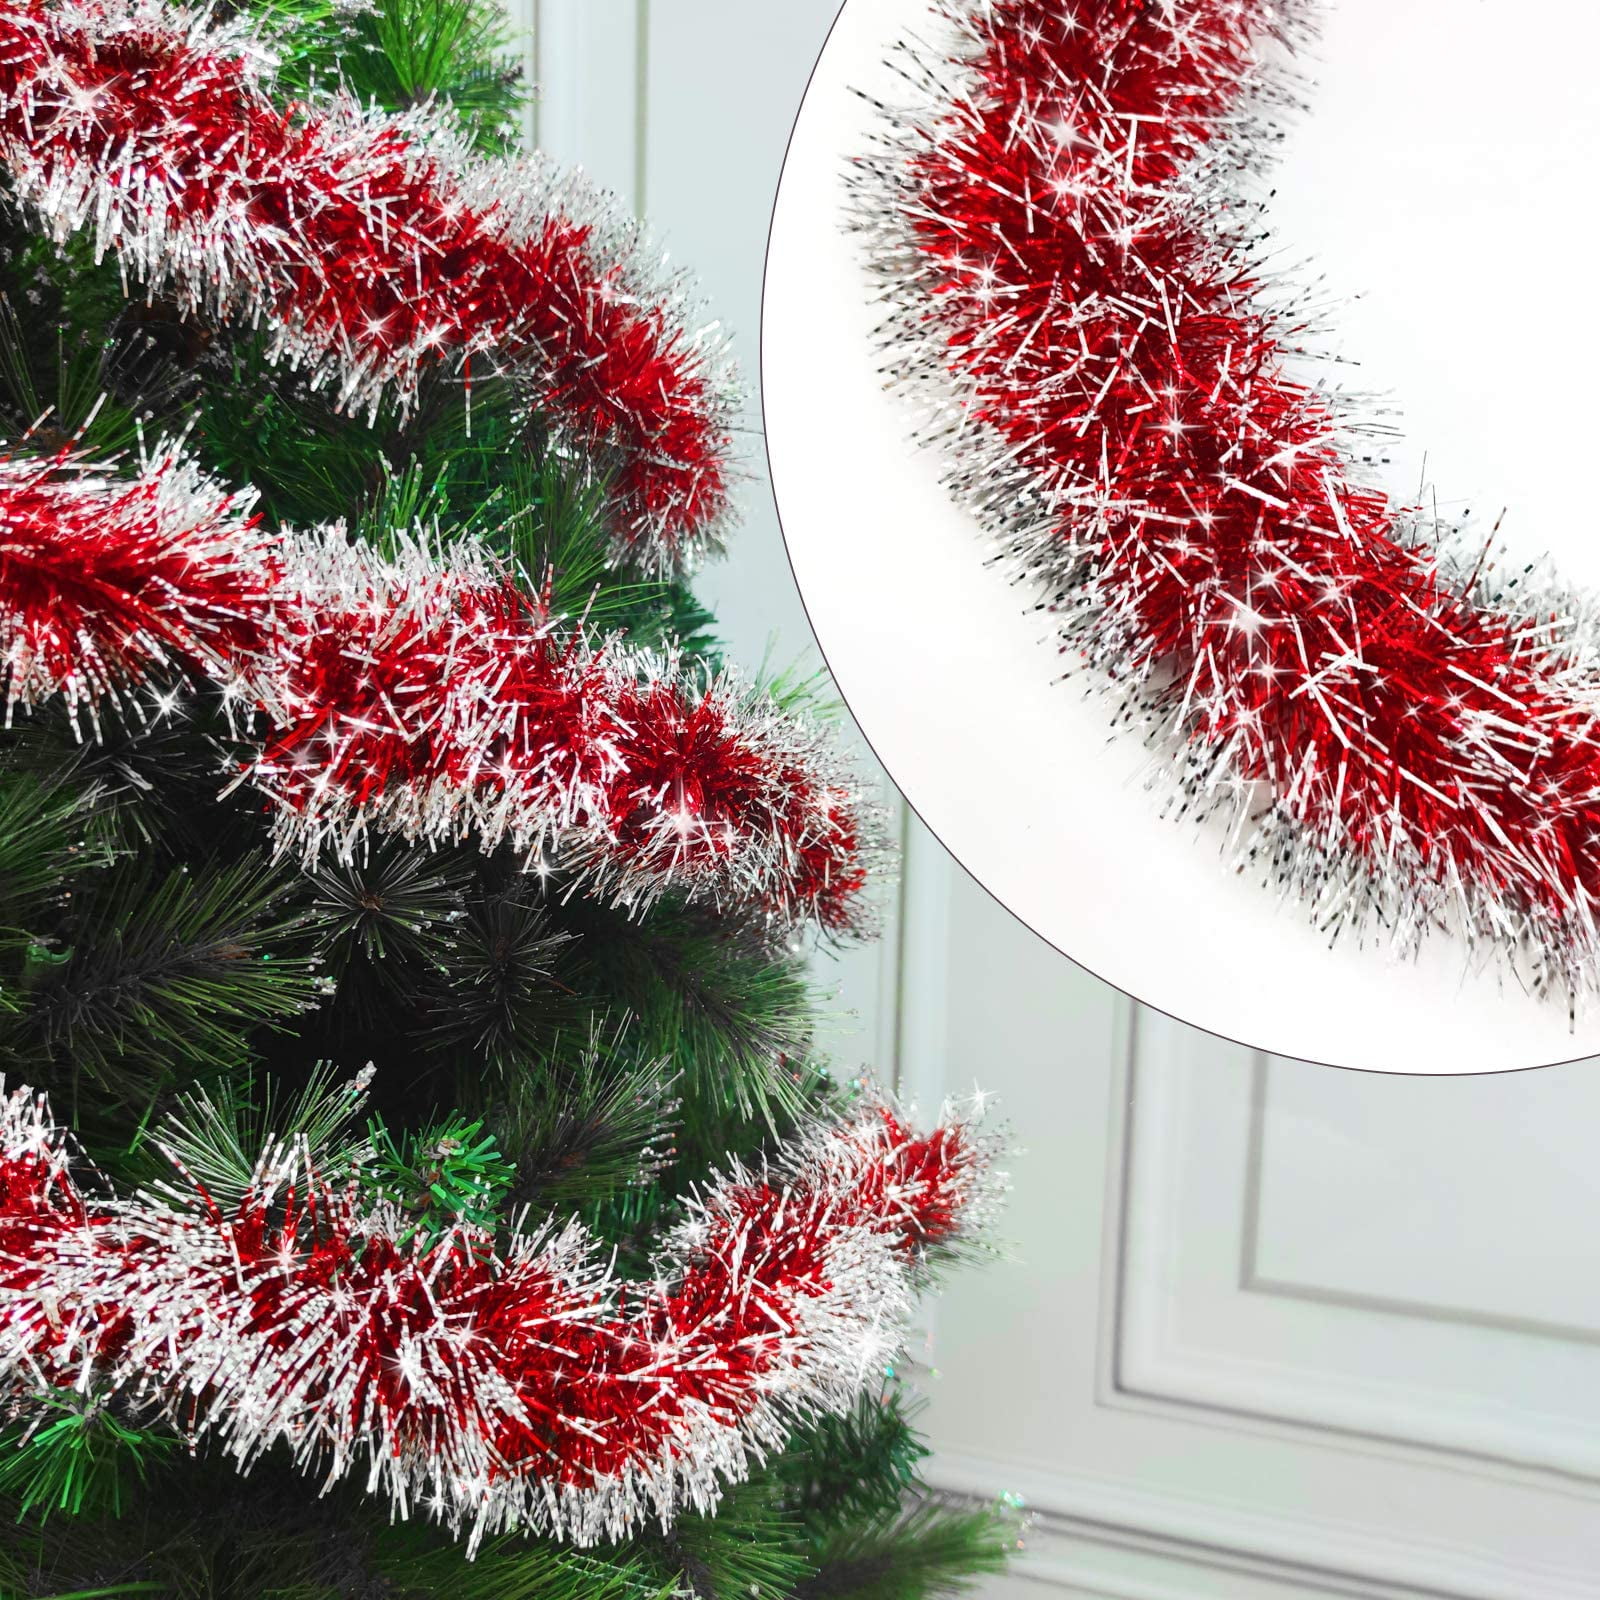 Husfou 6pcs Christmas Tinsel Garland Decorations, PVC Hanging Twist Metallic Streamers Garland for Xmas Tree Holiday Party Supplies Indoor Outdoor Home Decor, 6.6 feet - Walmart.com